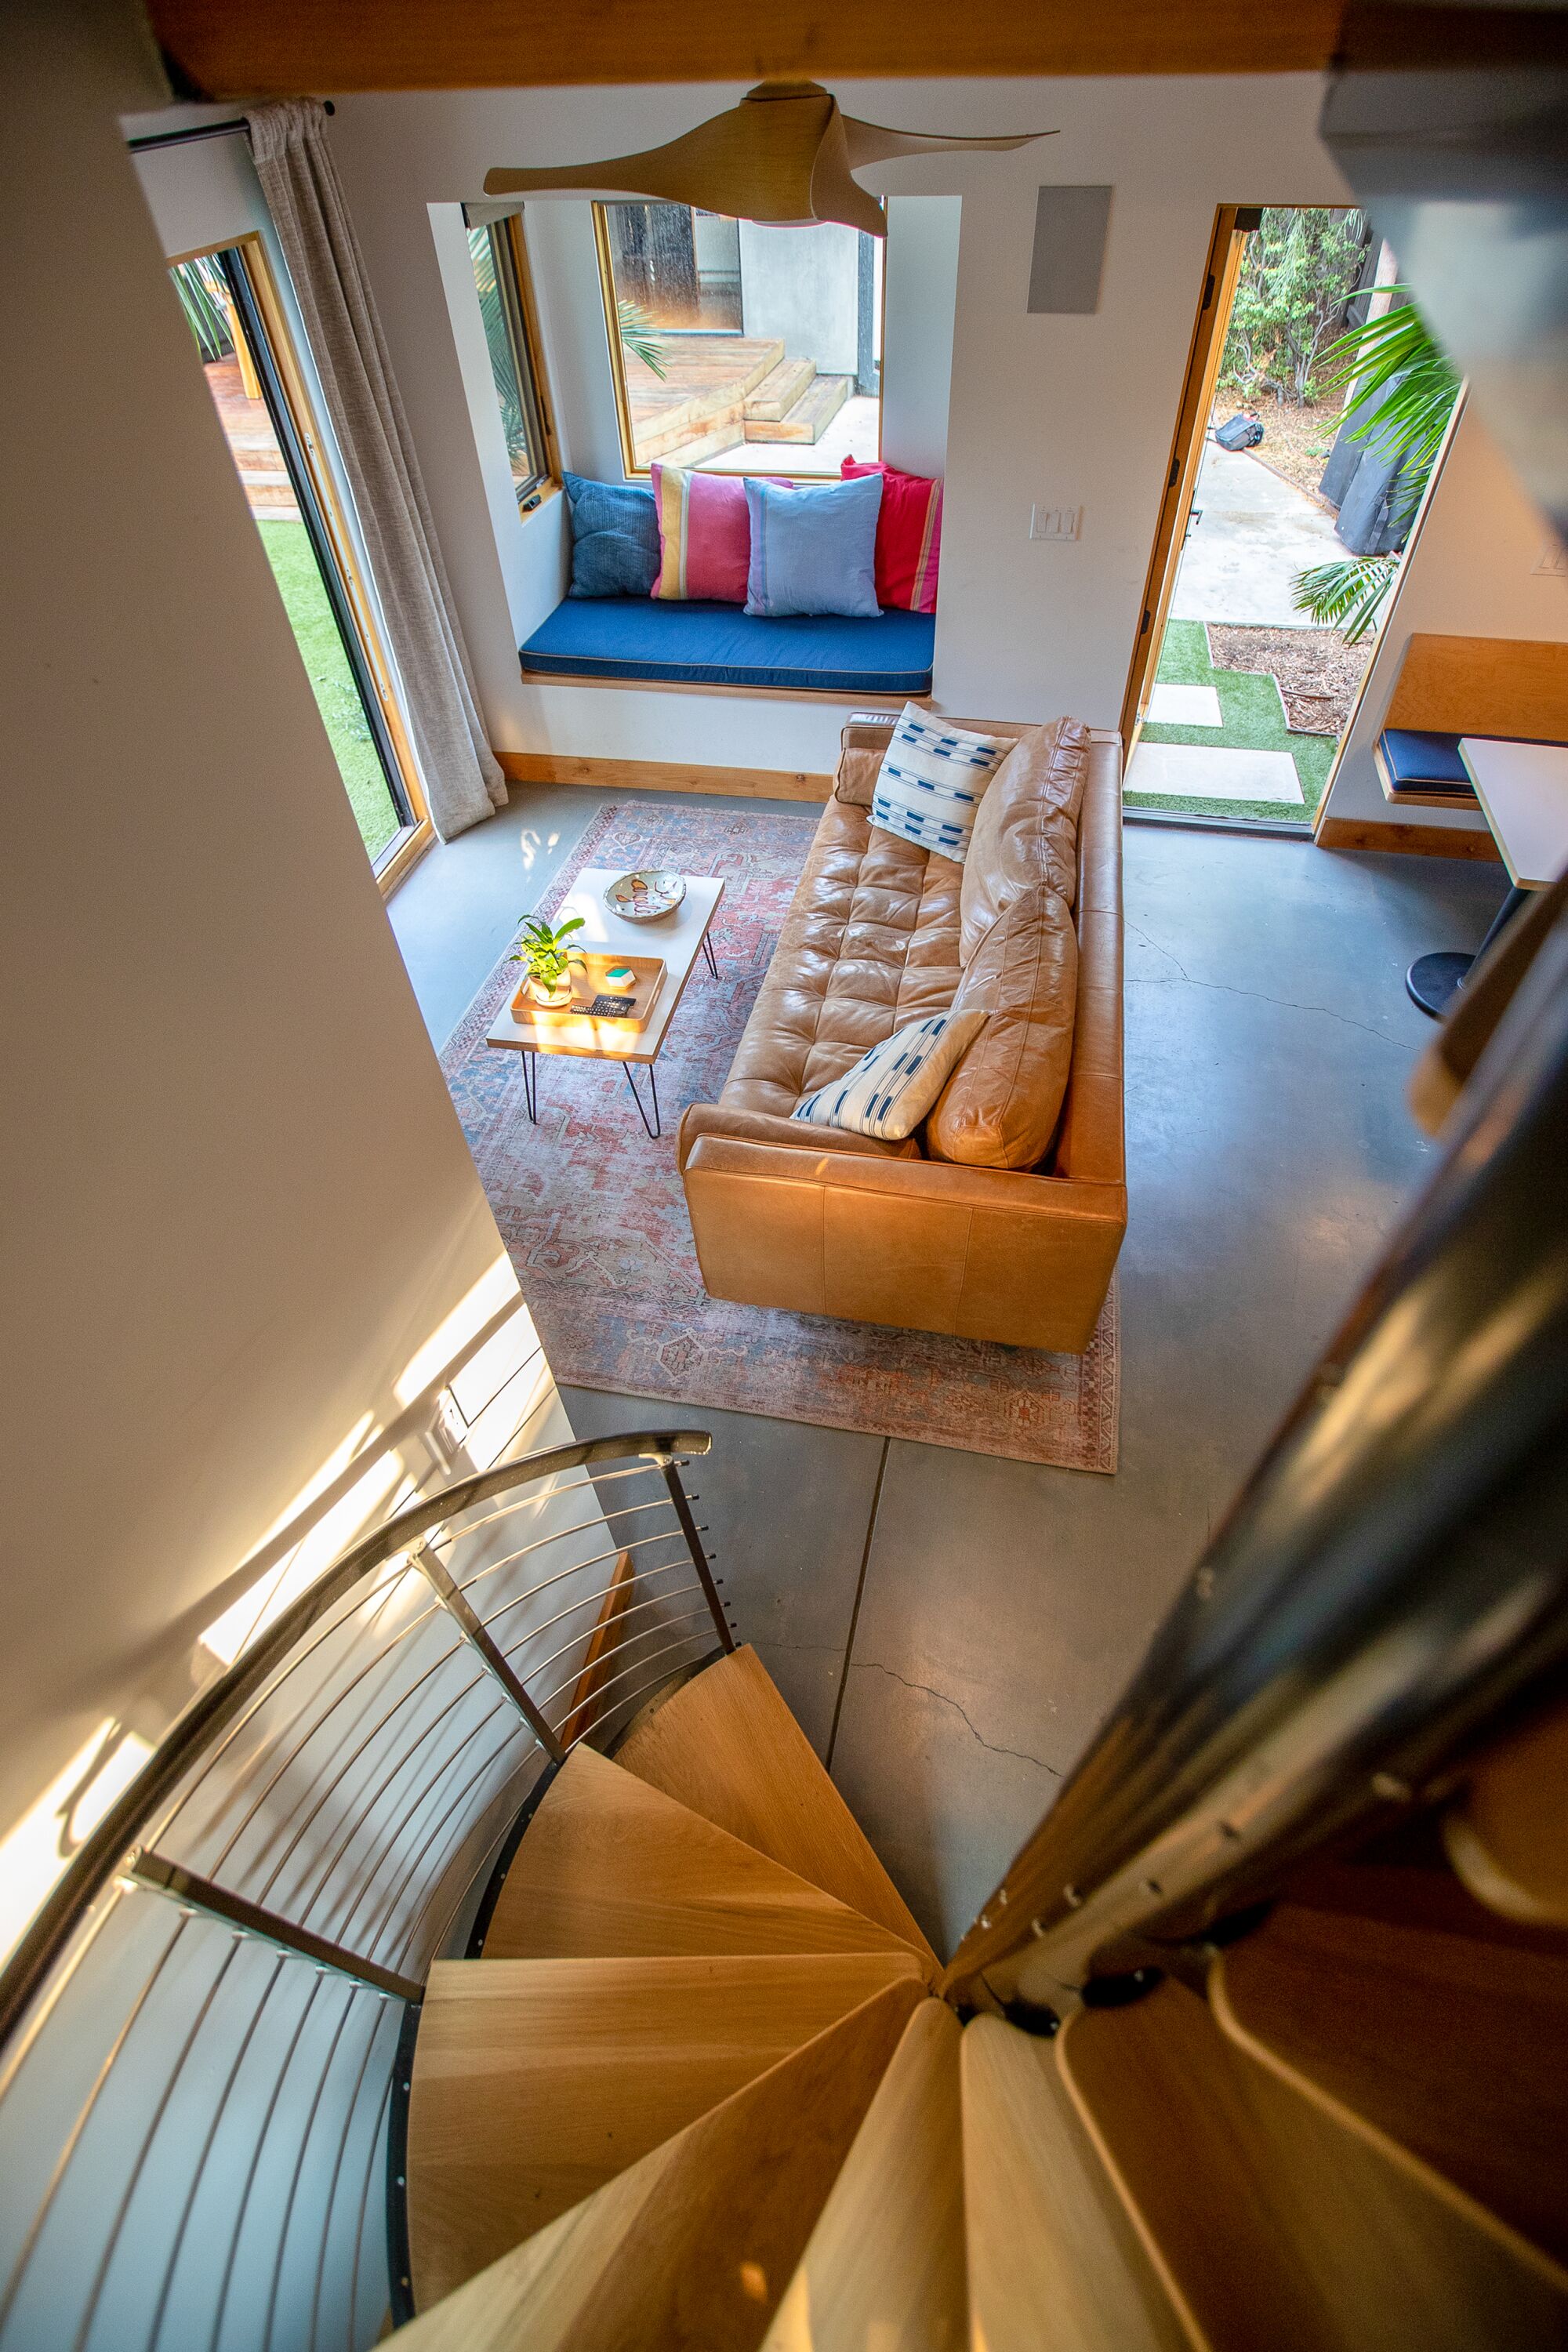 A view of the spiral staircase leading to the downstairs living room and kitchen